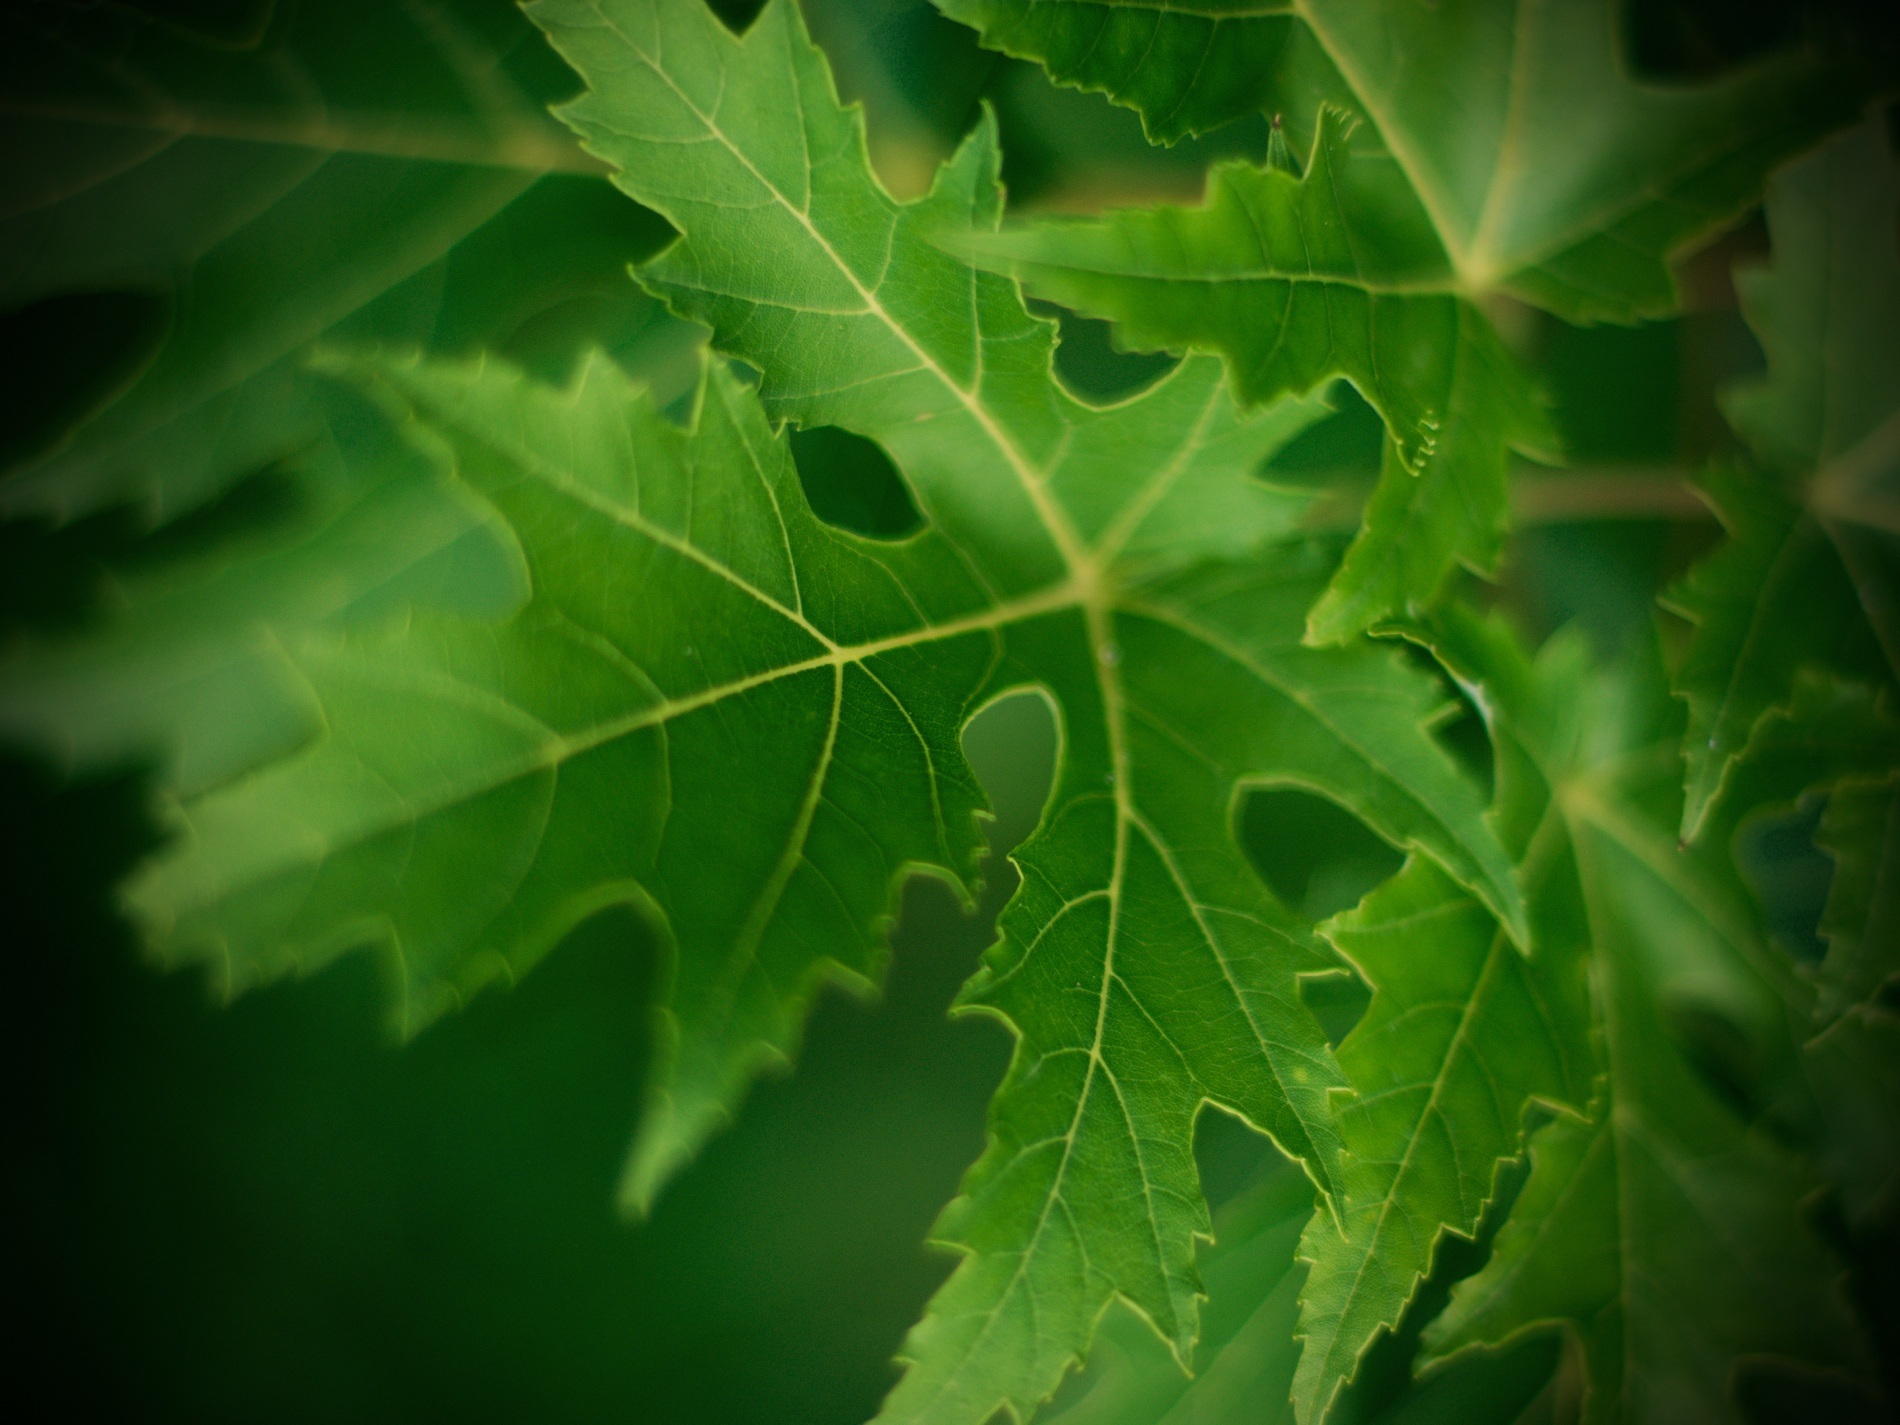 150659 Screensavers and Wallpapers Leaf for phone. Download green, macro, sheet, leaf pictures for free